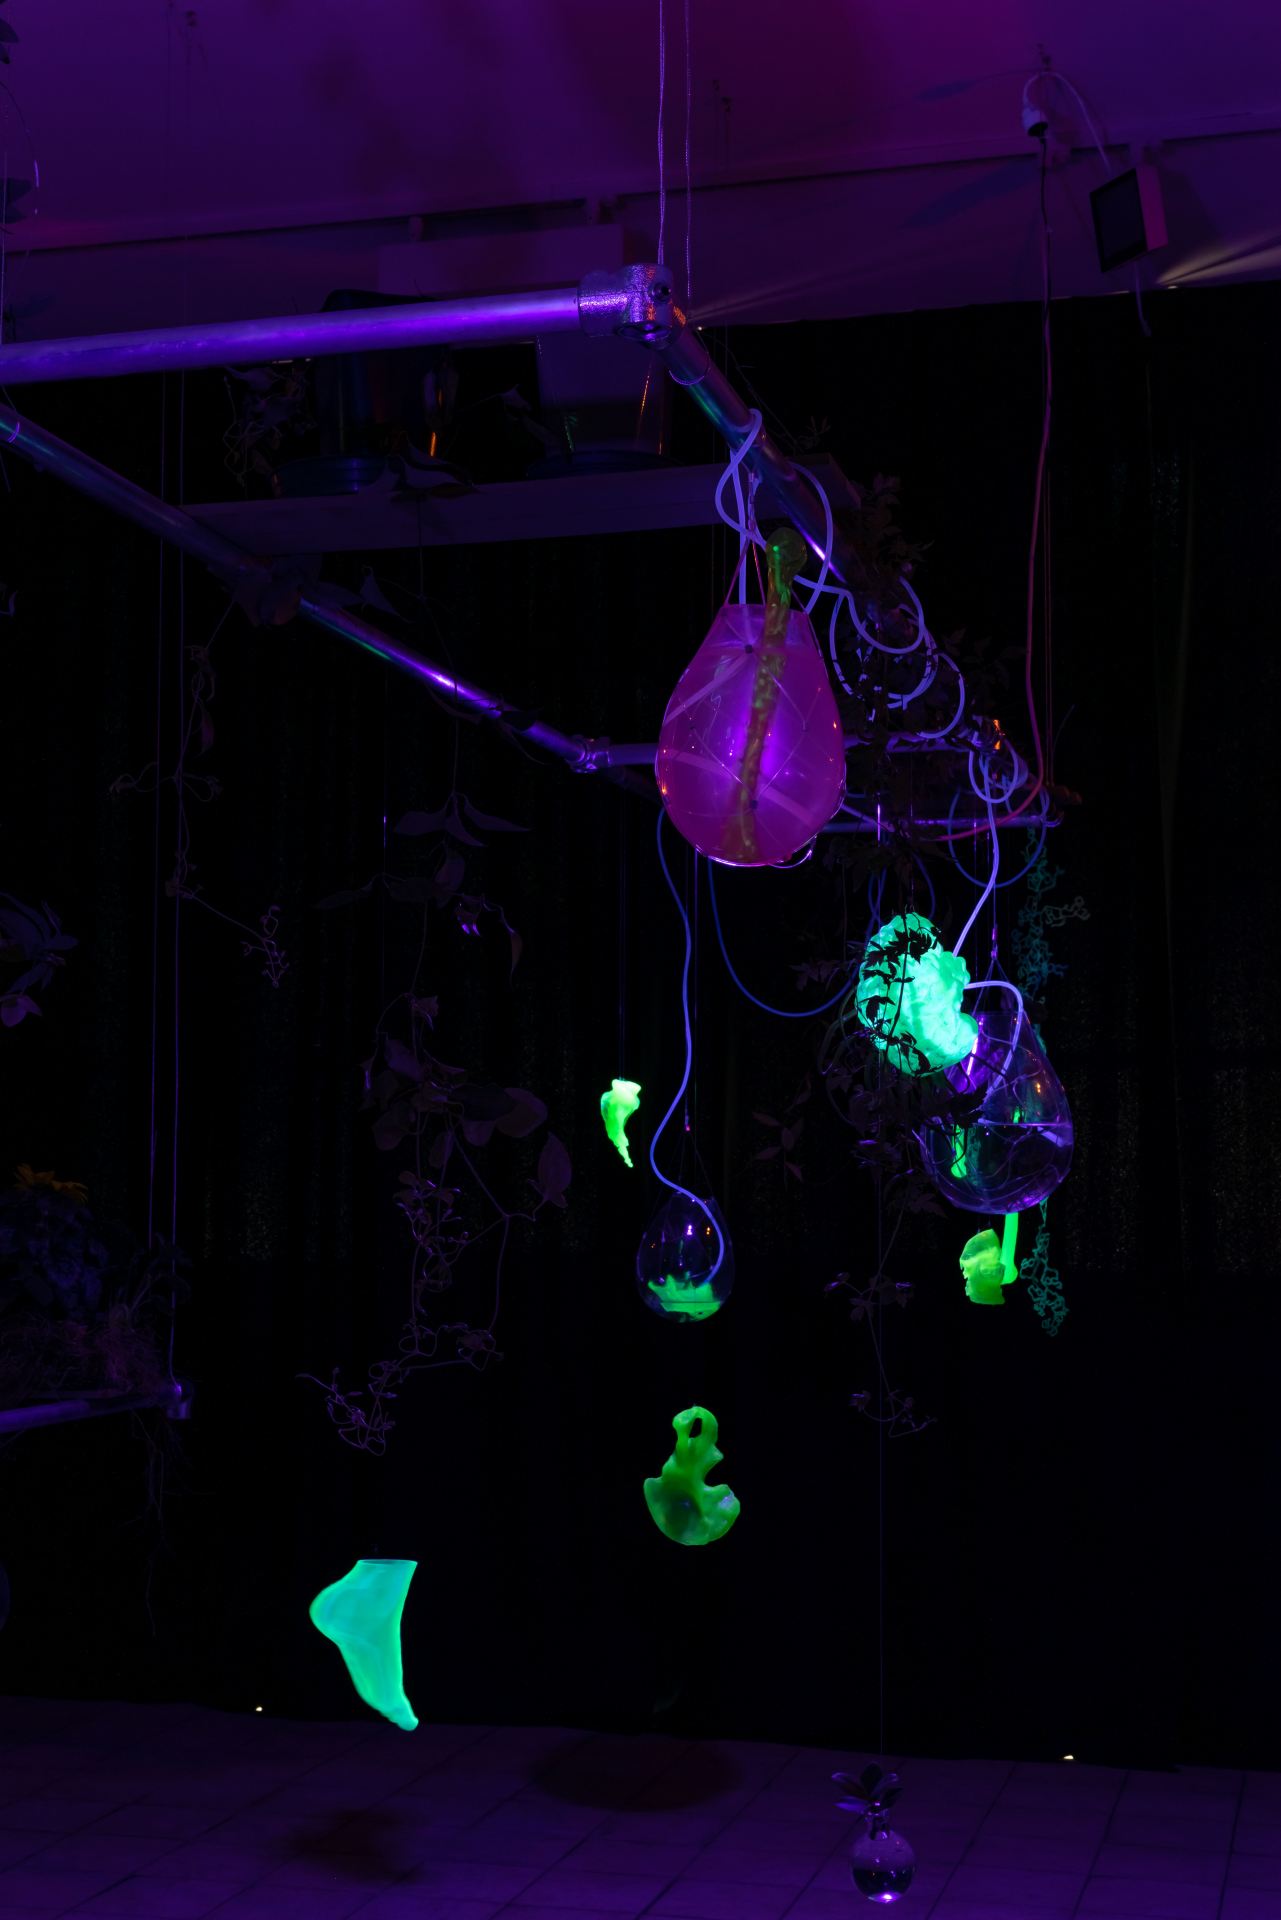 Installation shots of sculptures that demonstrate photosynthesis.